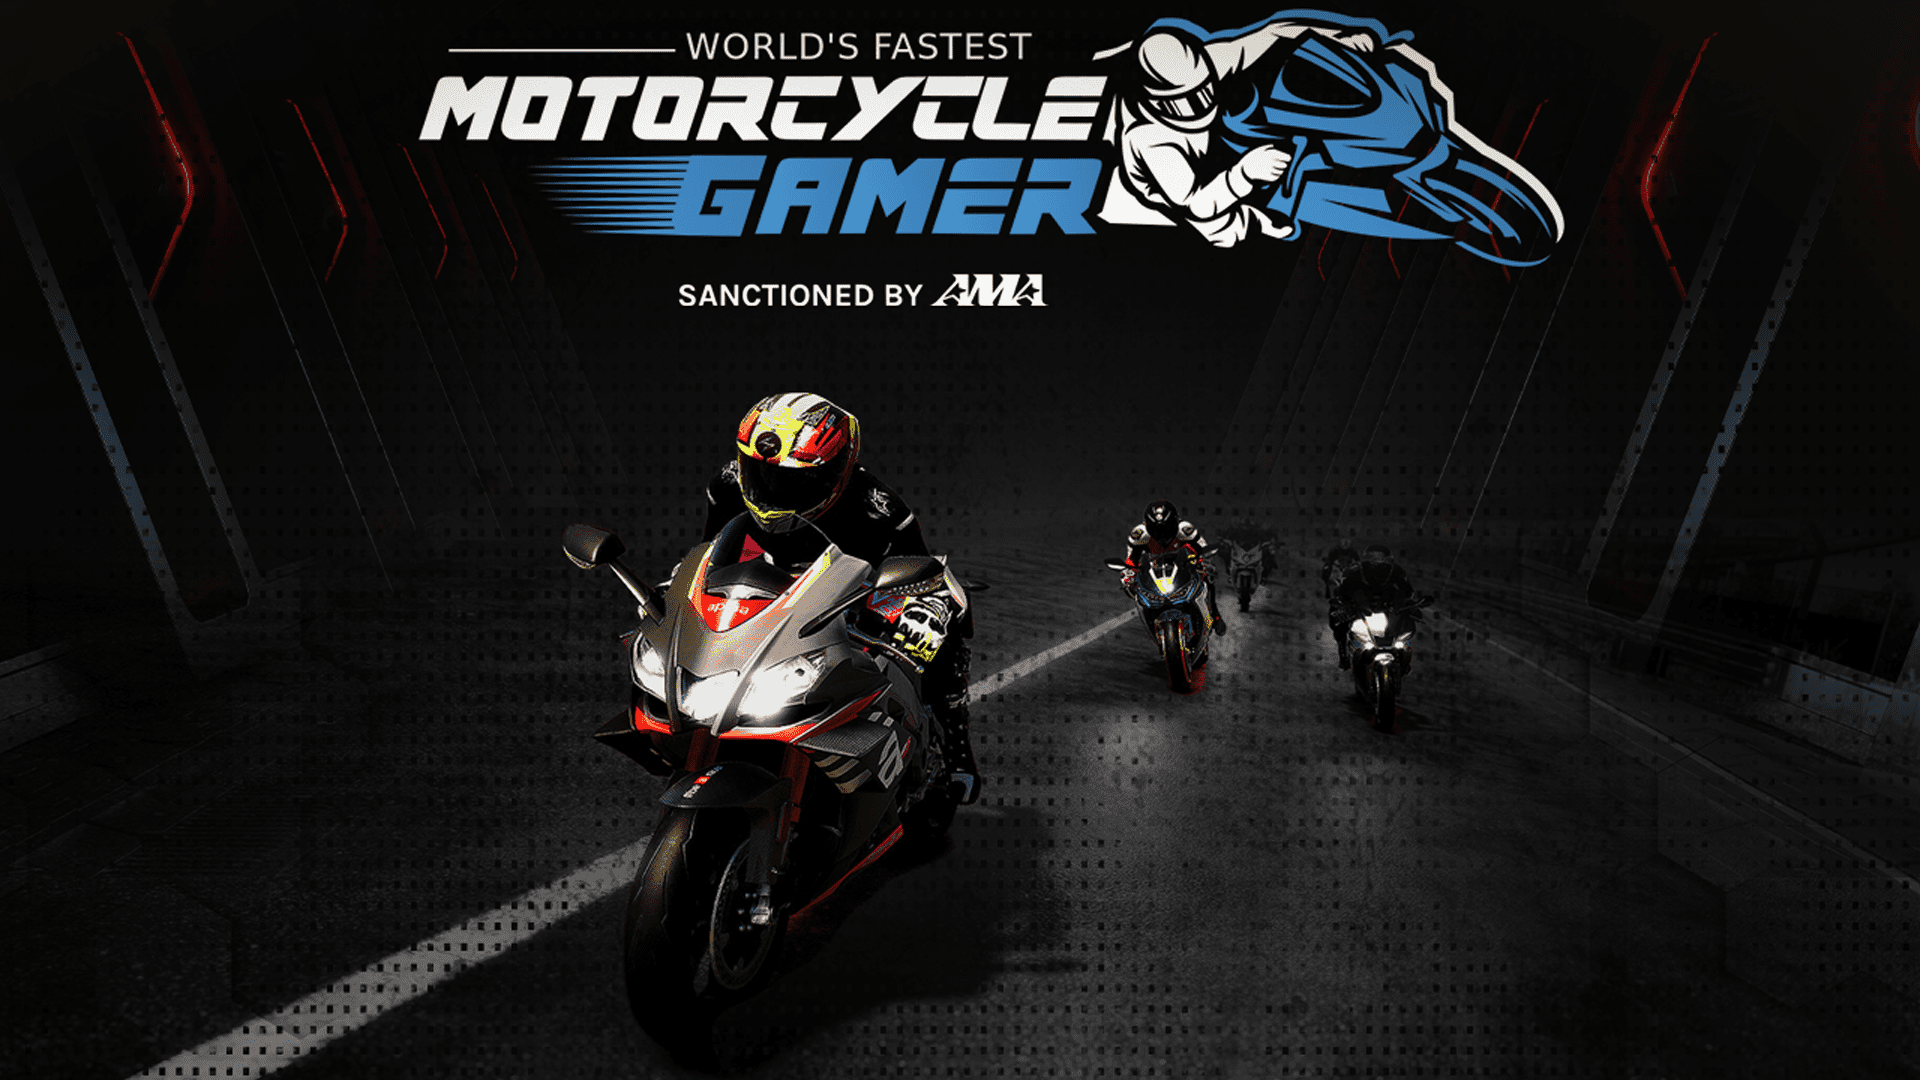 World's Fastest Motorcycle Gamer challenge starts 29th January